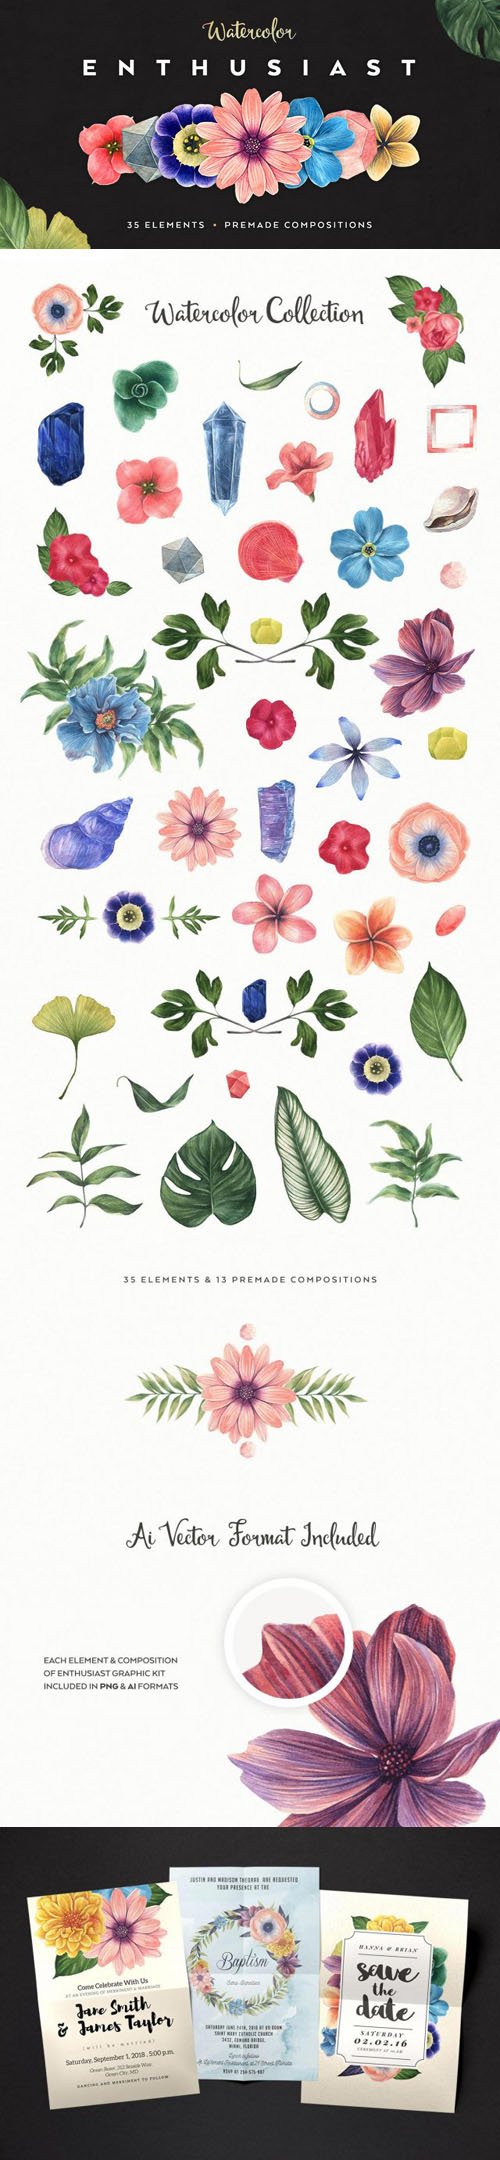 Watercolor Enthusiast Vector Graphic Pack - Premade Compositions